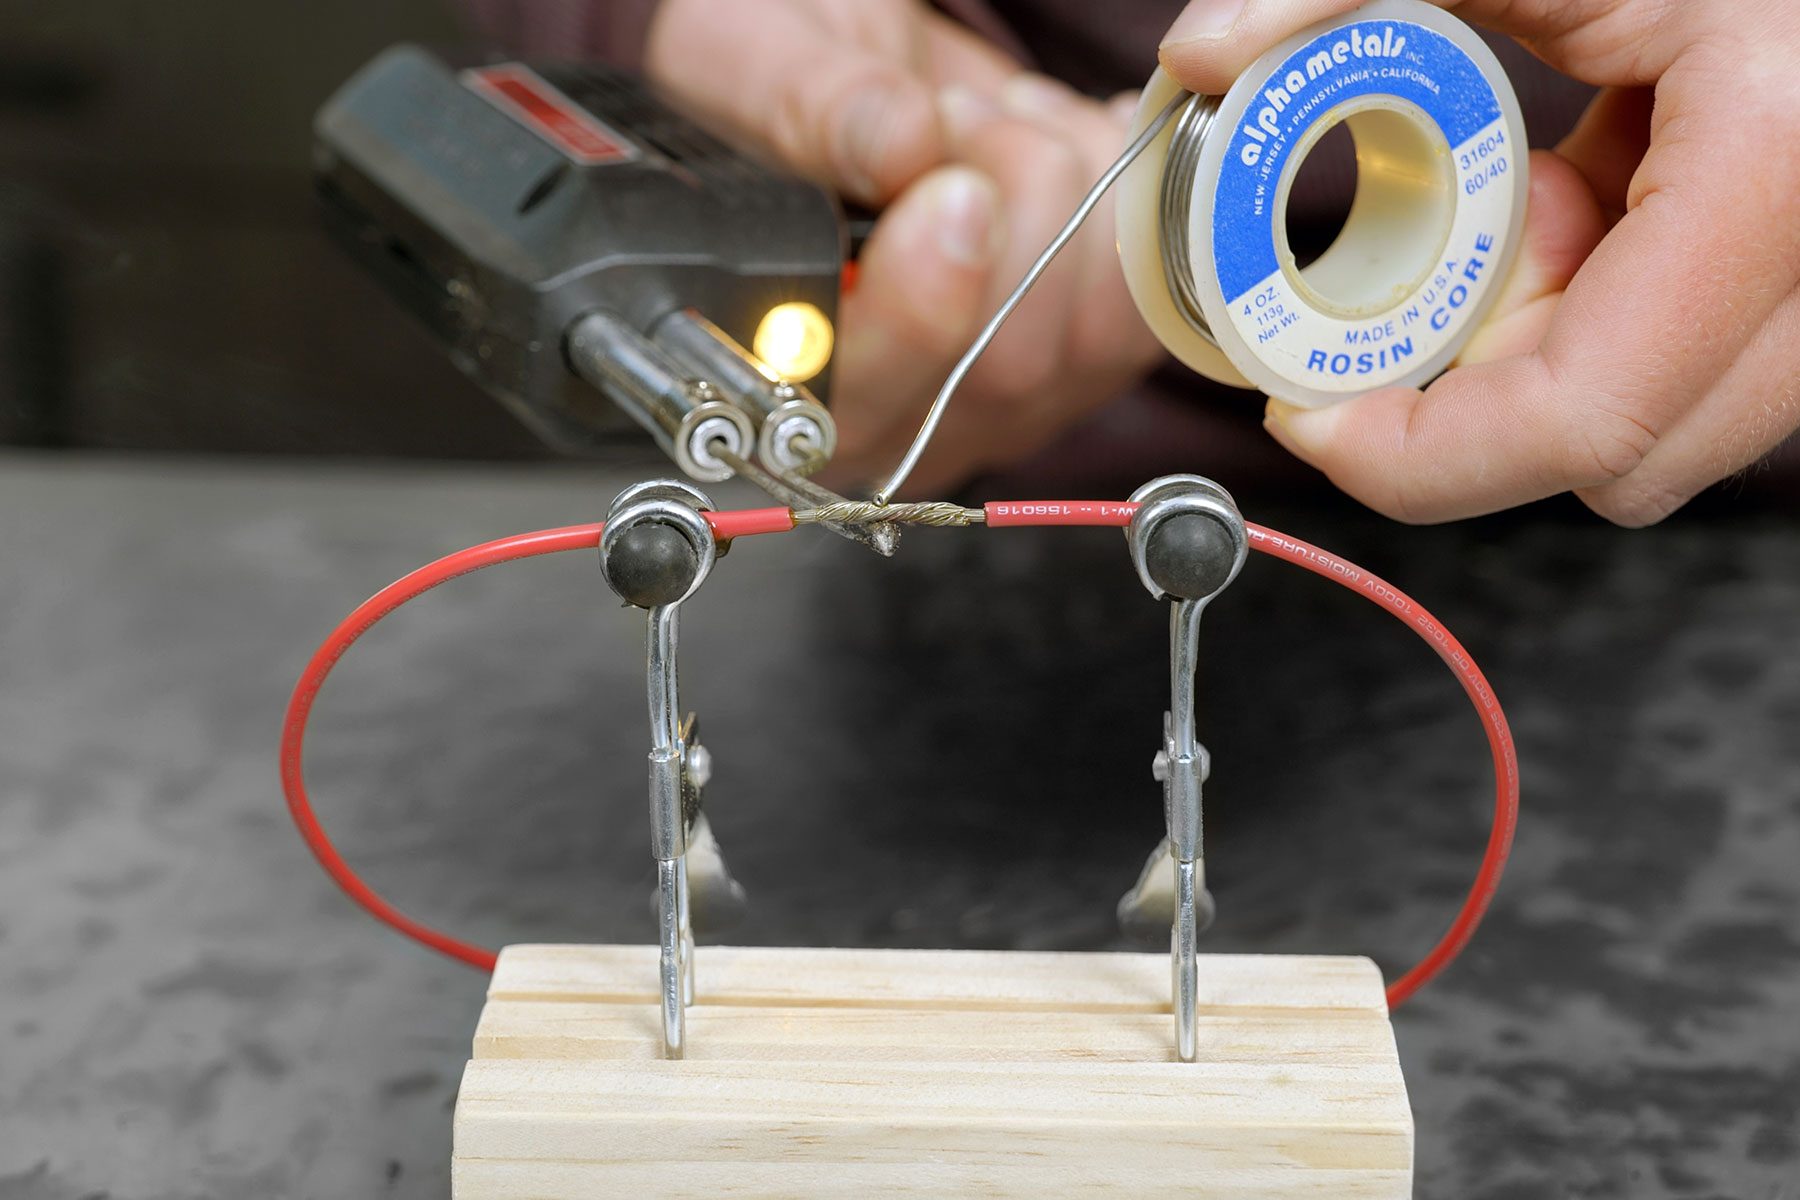 How To Solder Wires